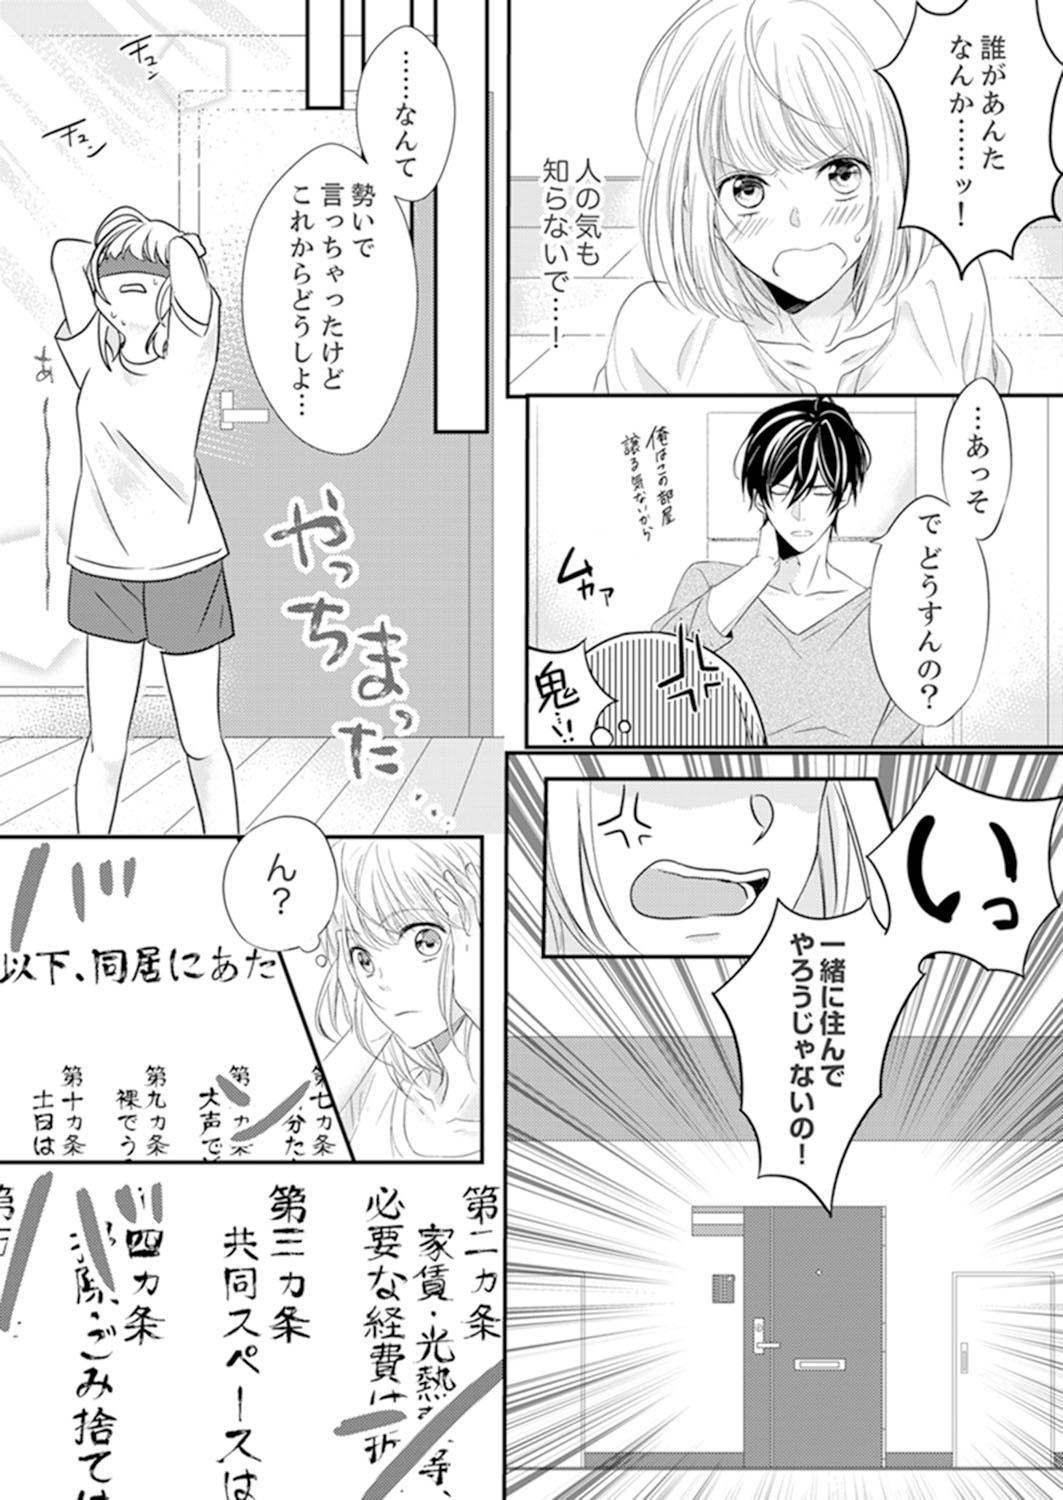 Fisting ルール違反はイクまでＨ!?～幼なじみと同居はじめました Ch.1-21 Couples - Page 8